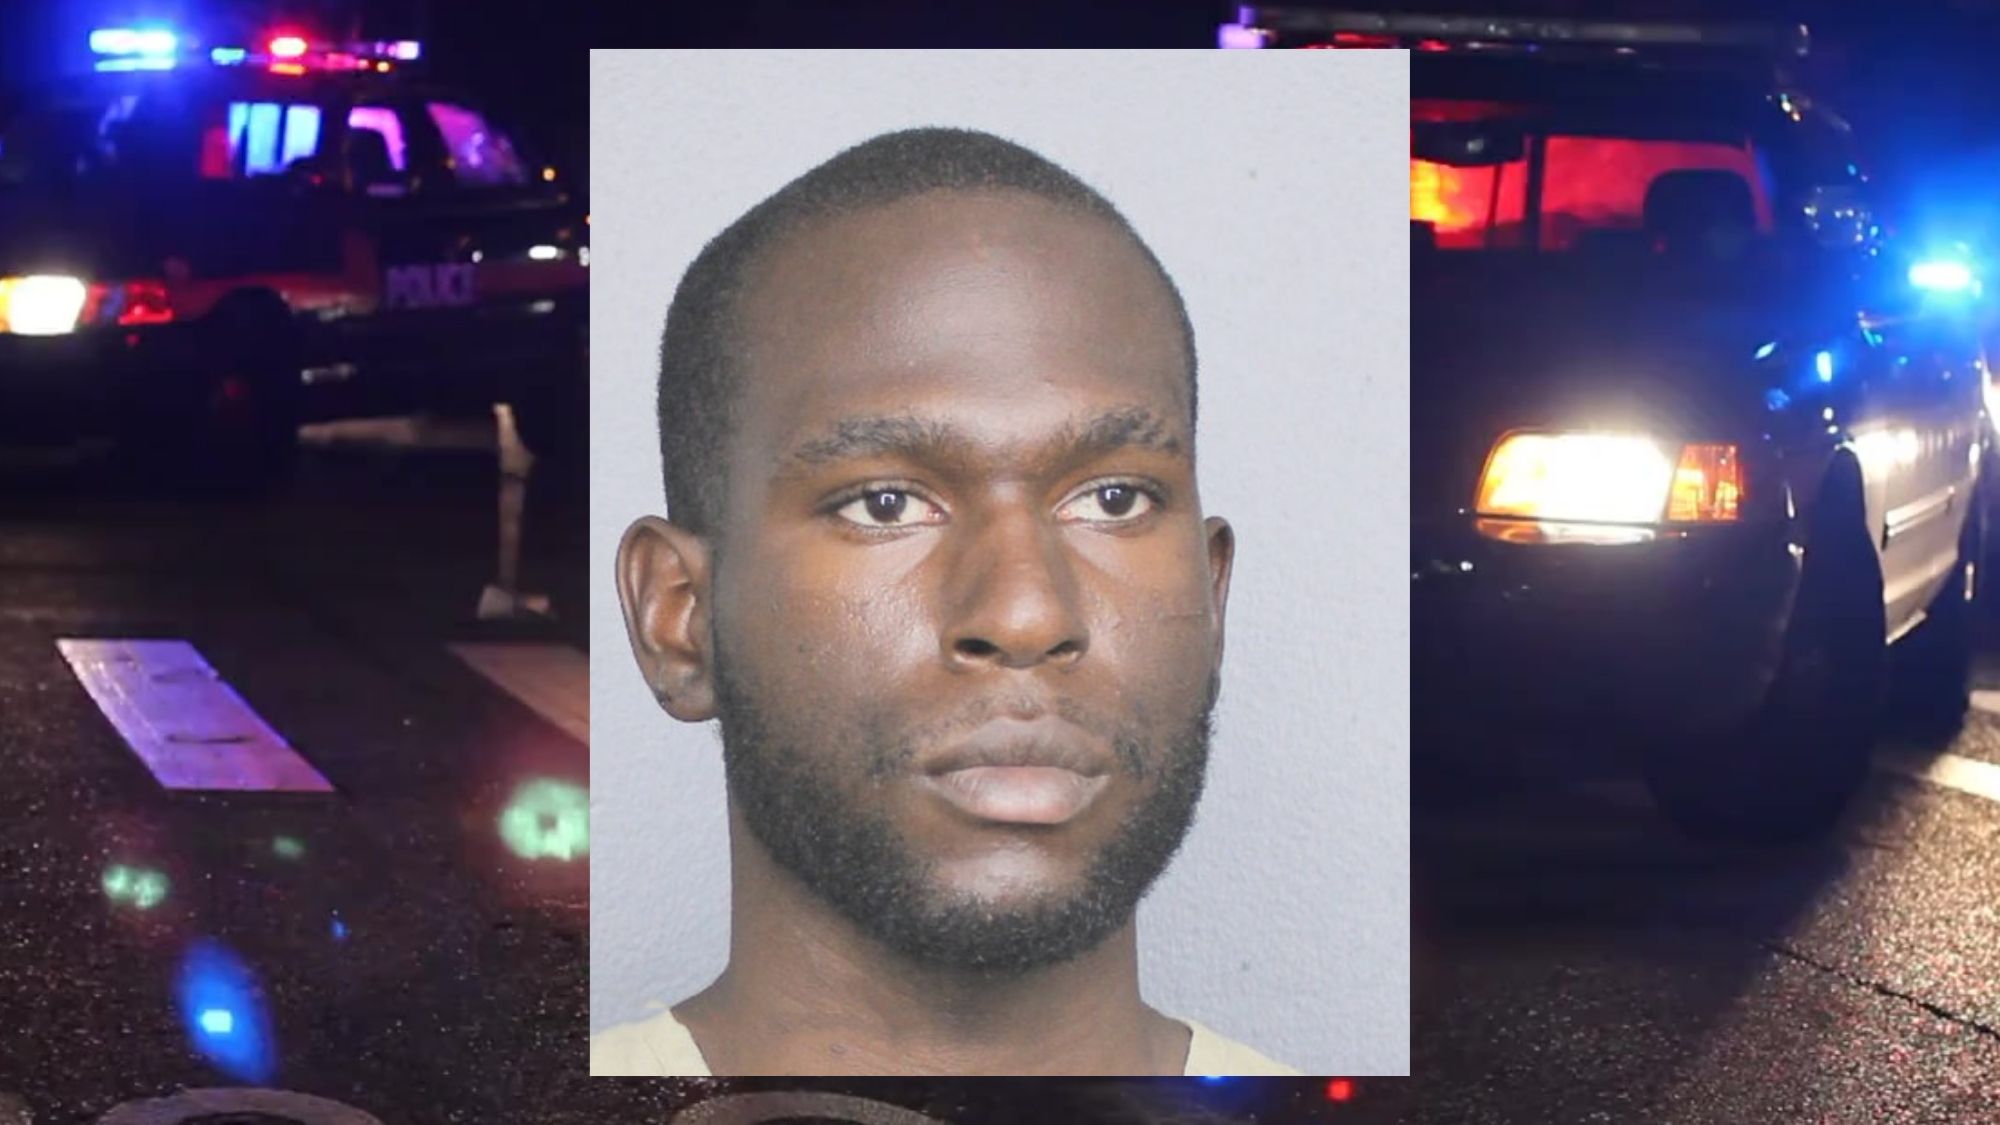 Tamarac Man Arrested for Stalking and Lewd Behavior After Chasing Woman While Masturbating